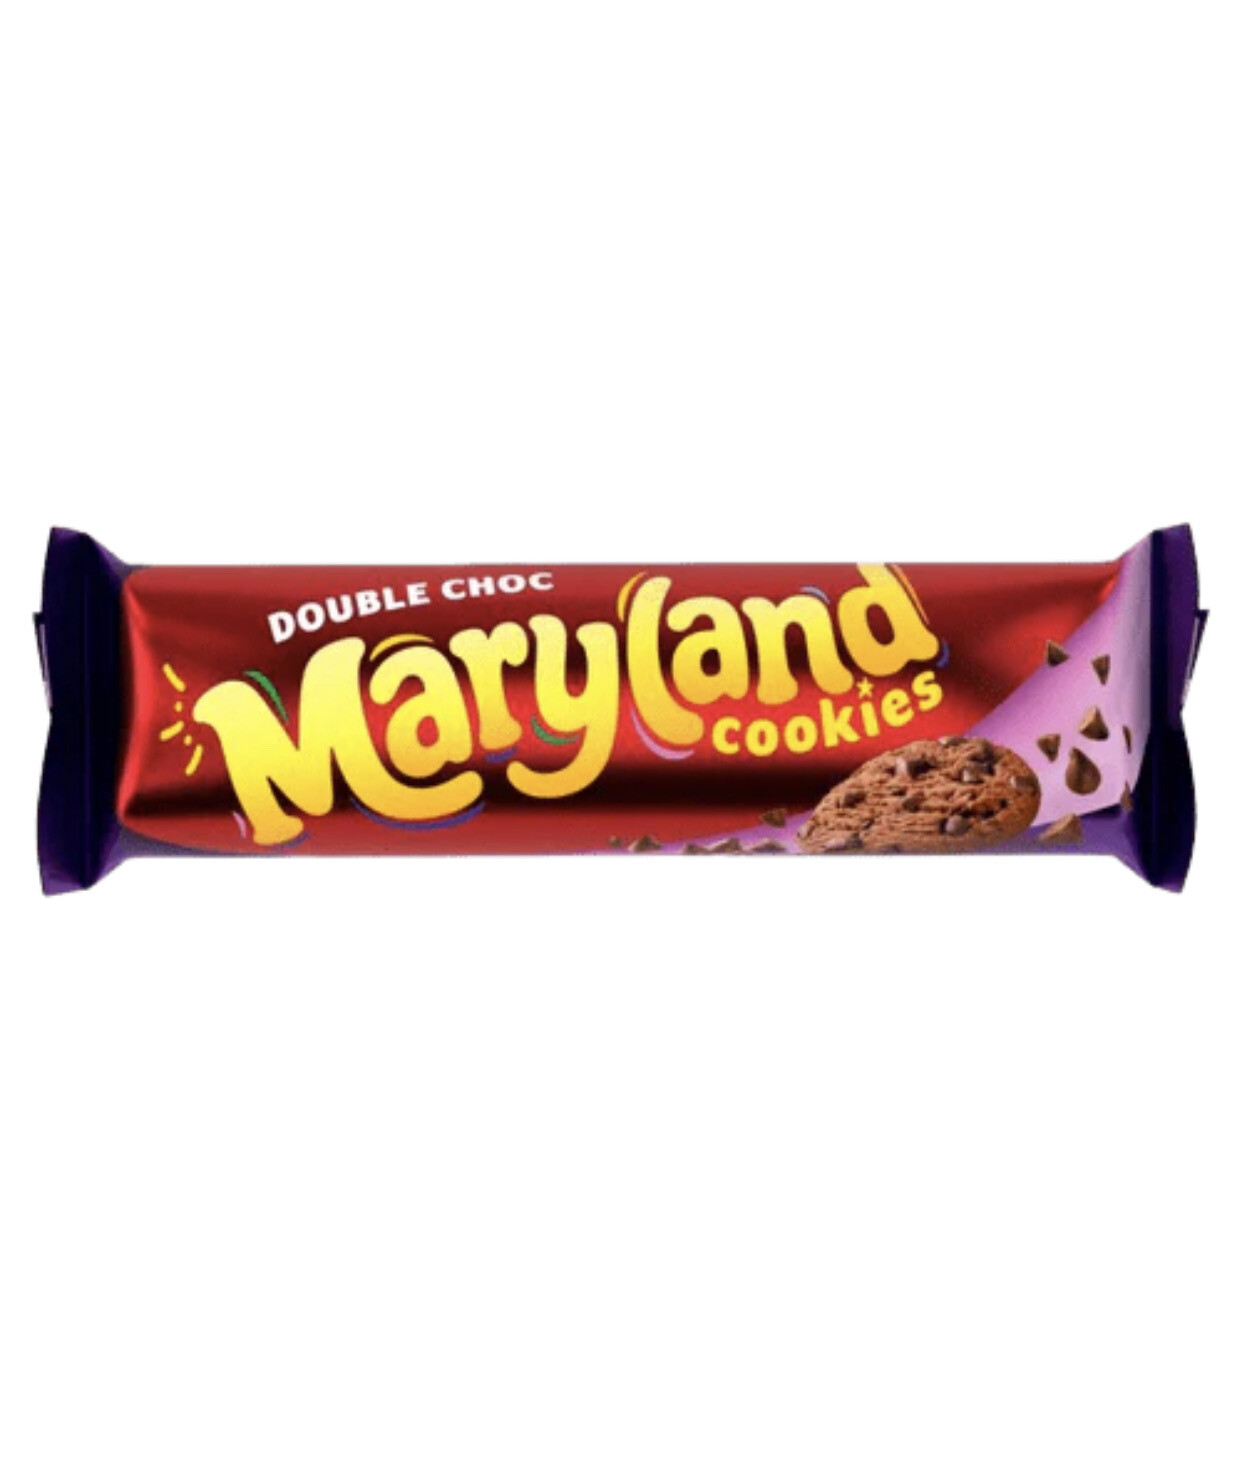 2 Got £1.50 Maryland Double Choc Cookies 136gBBE-07/24